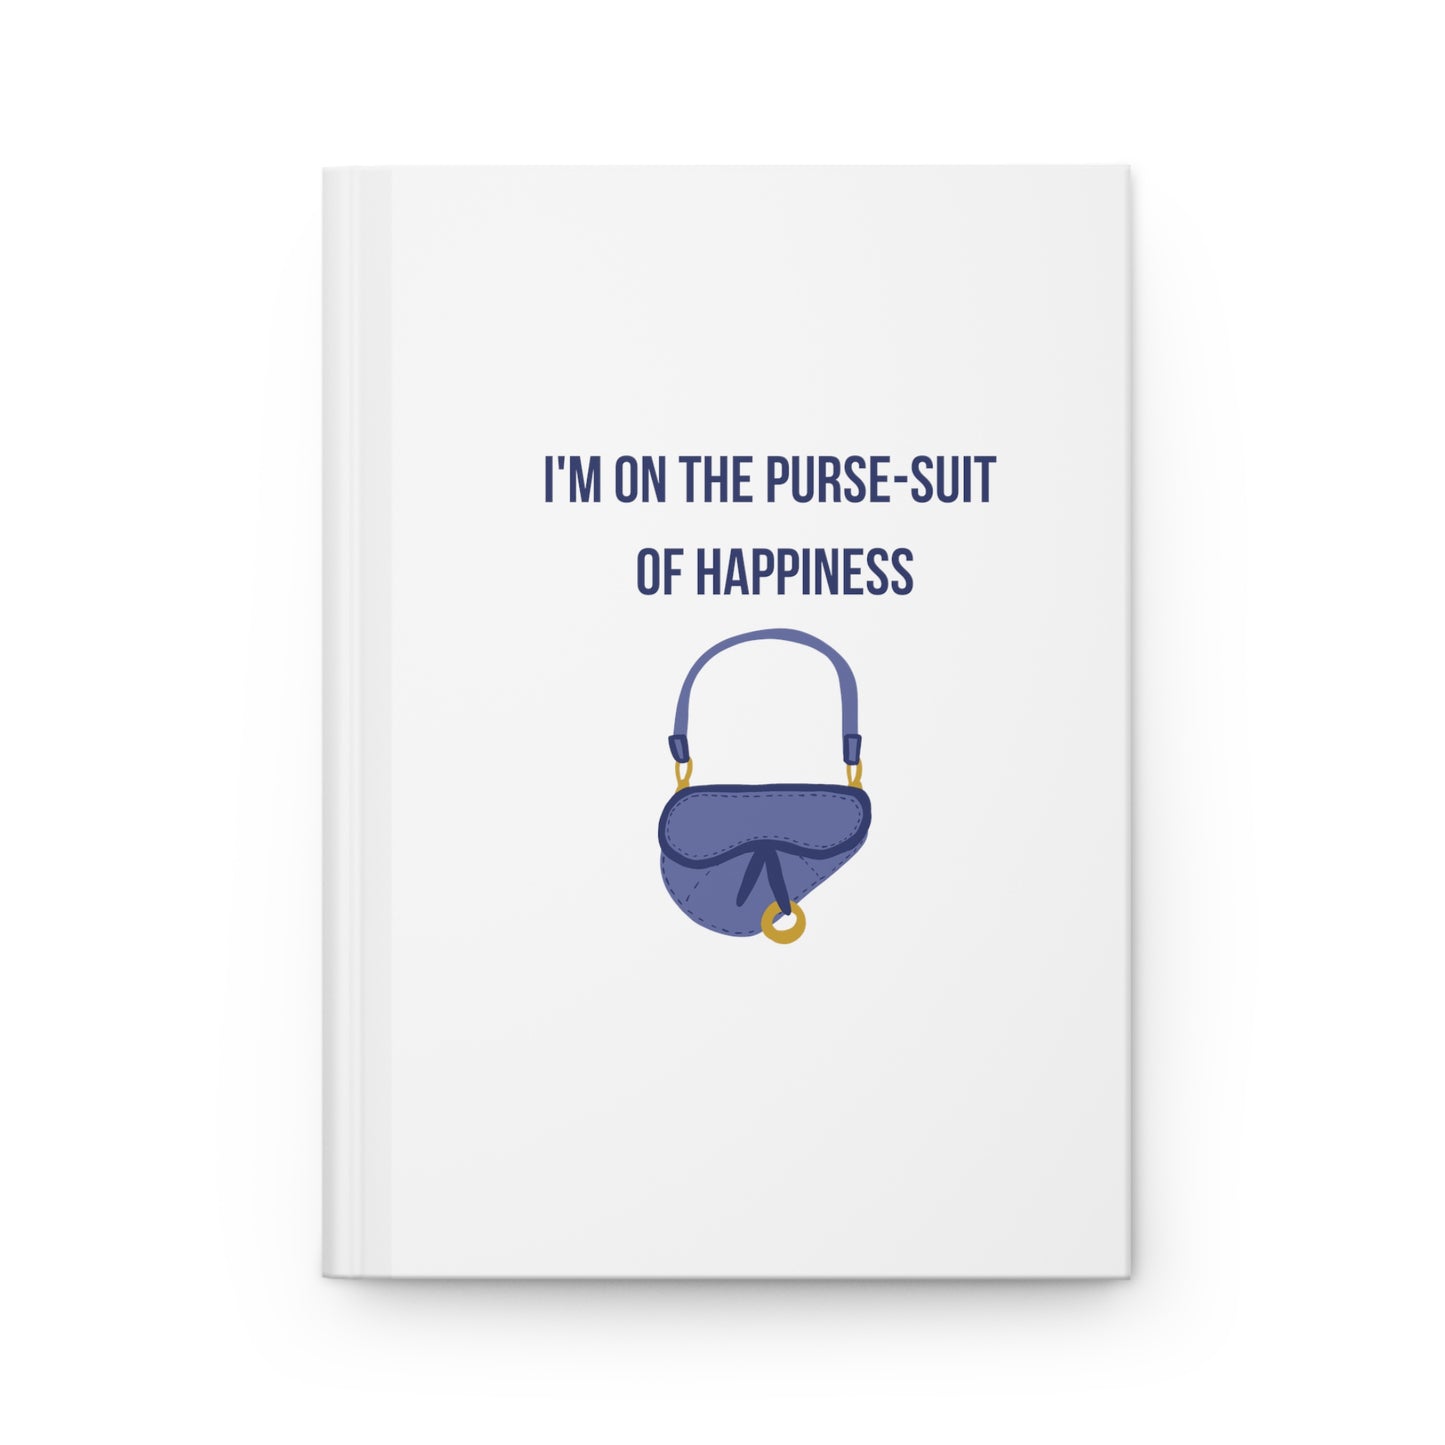 Purse-suit of Happiness Hardcover Journal Matte - Blue